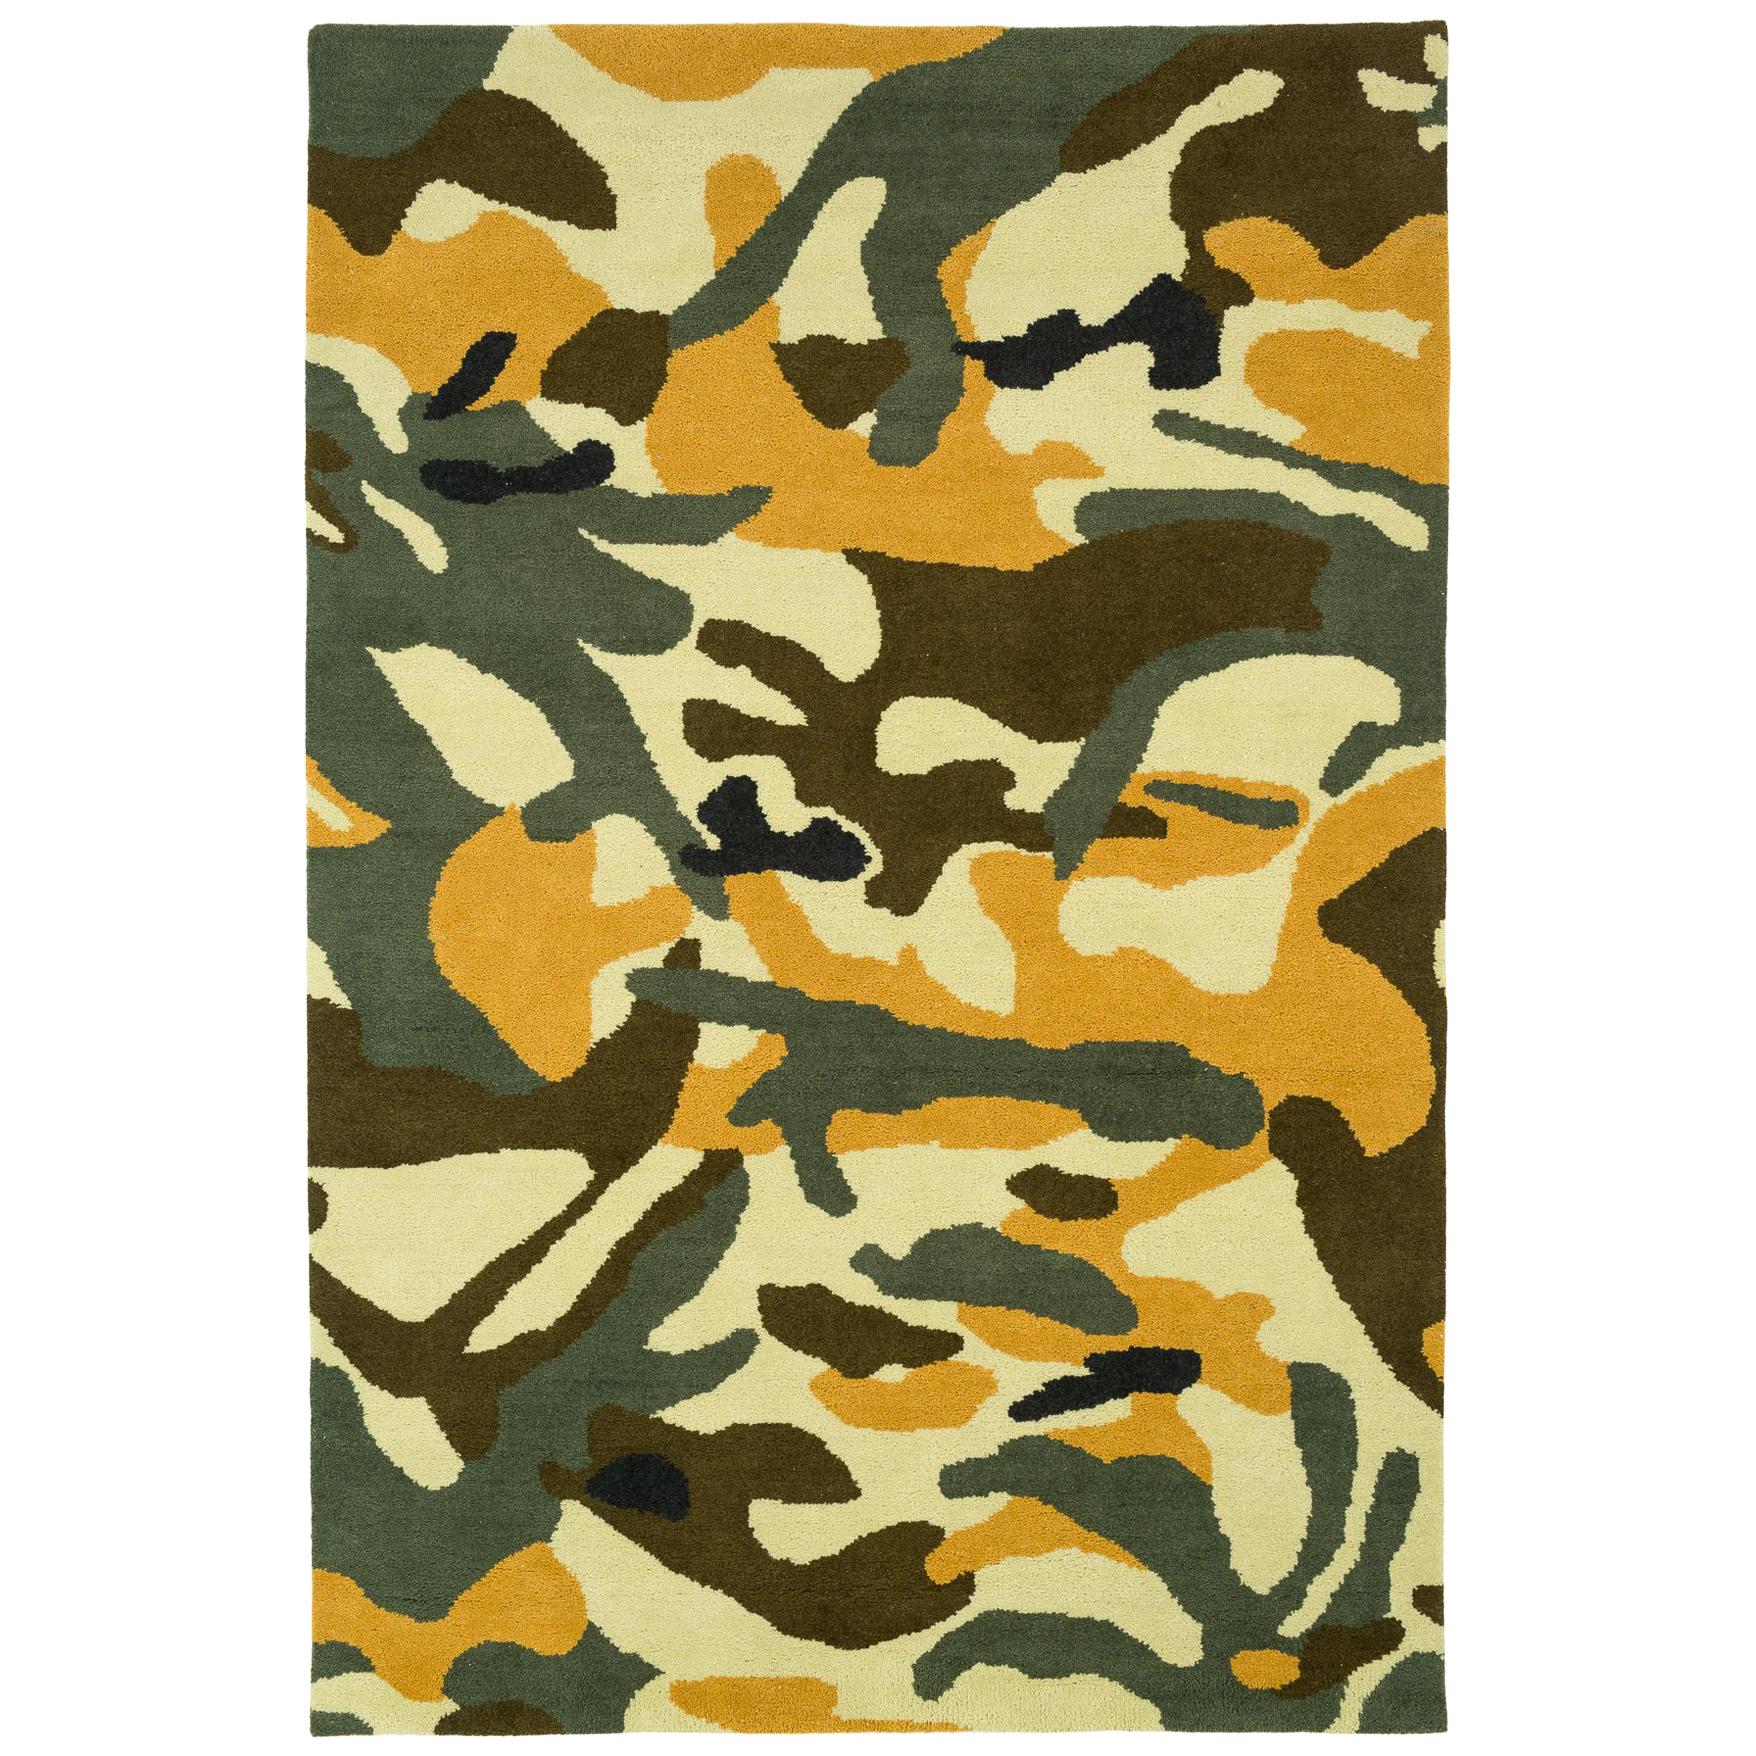 Contemporary Indoor or Outdoor Camo Fatigues Rug by Carini For Sale